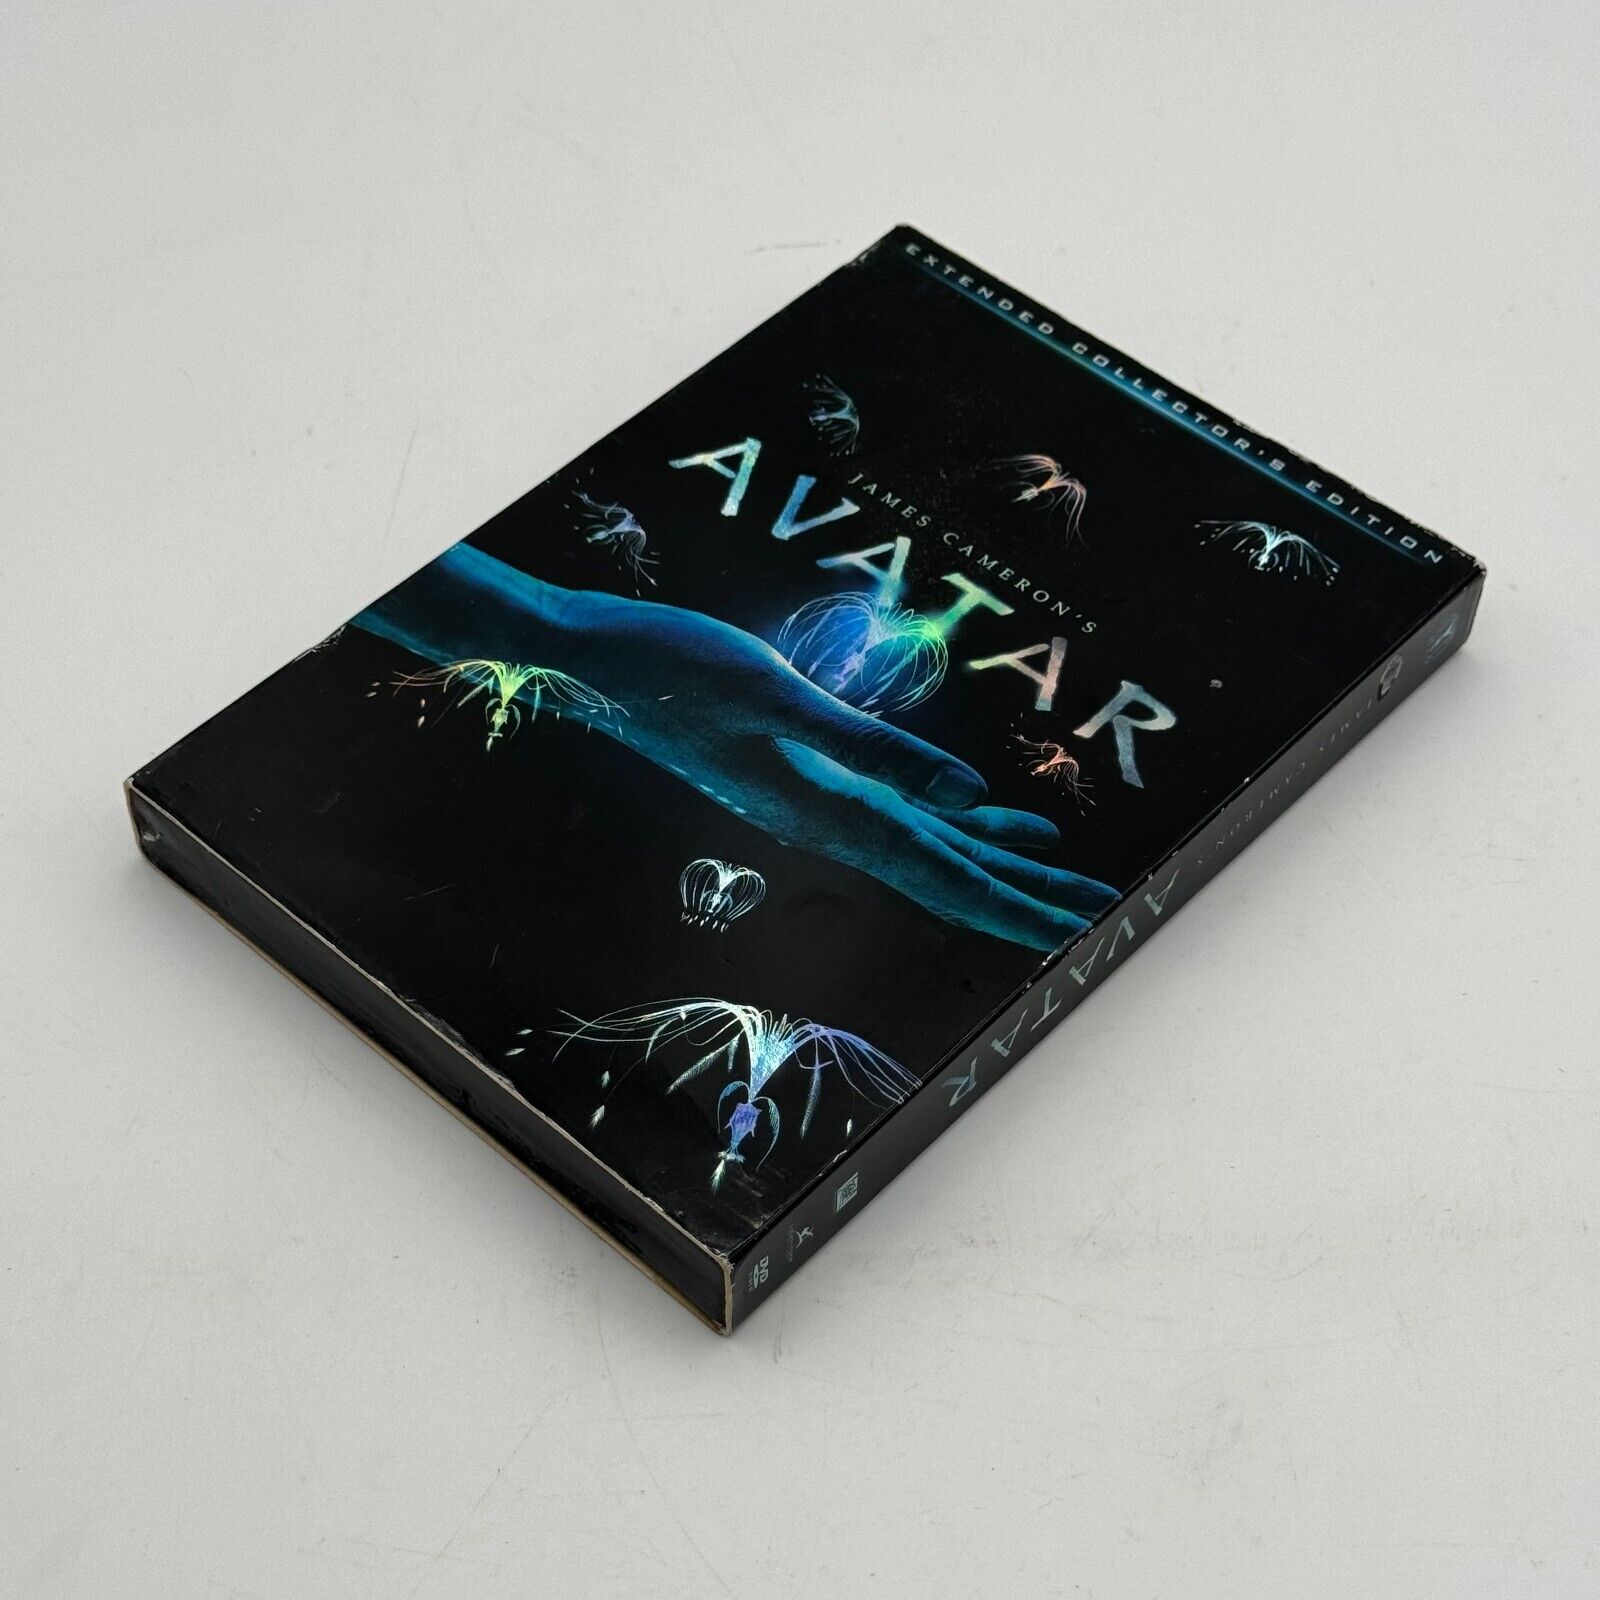 Avatar (2009) Extended Collector's Edition 3 Disc DVD Boxset - Booklet & Sleeve